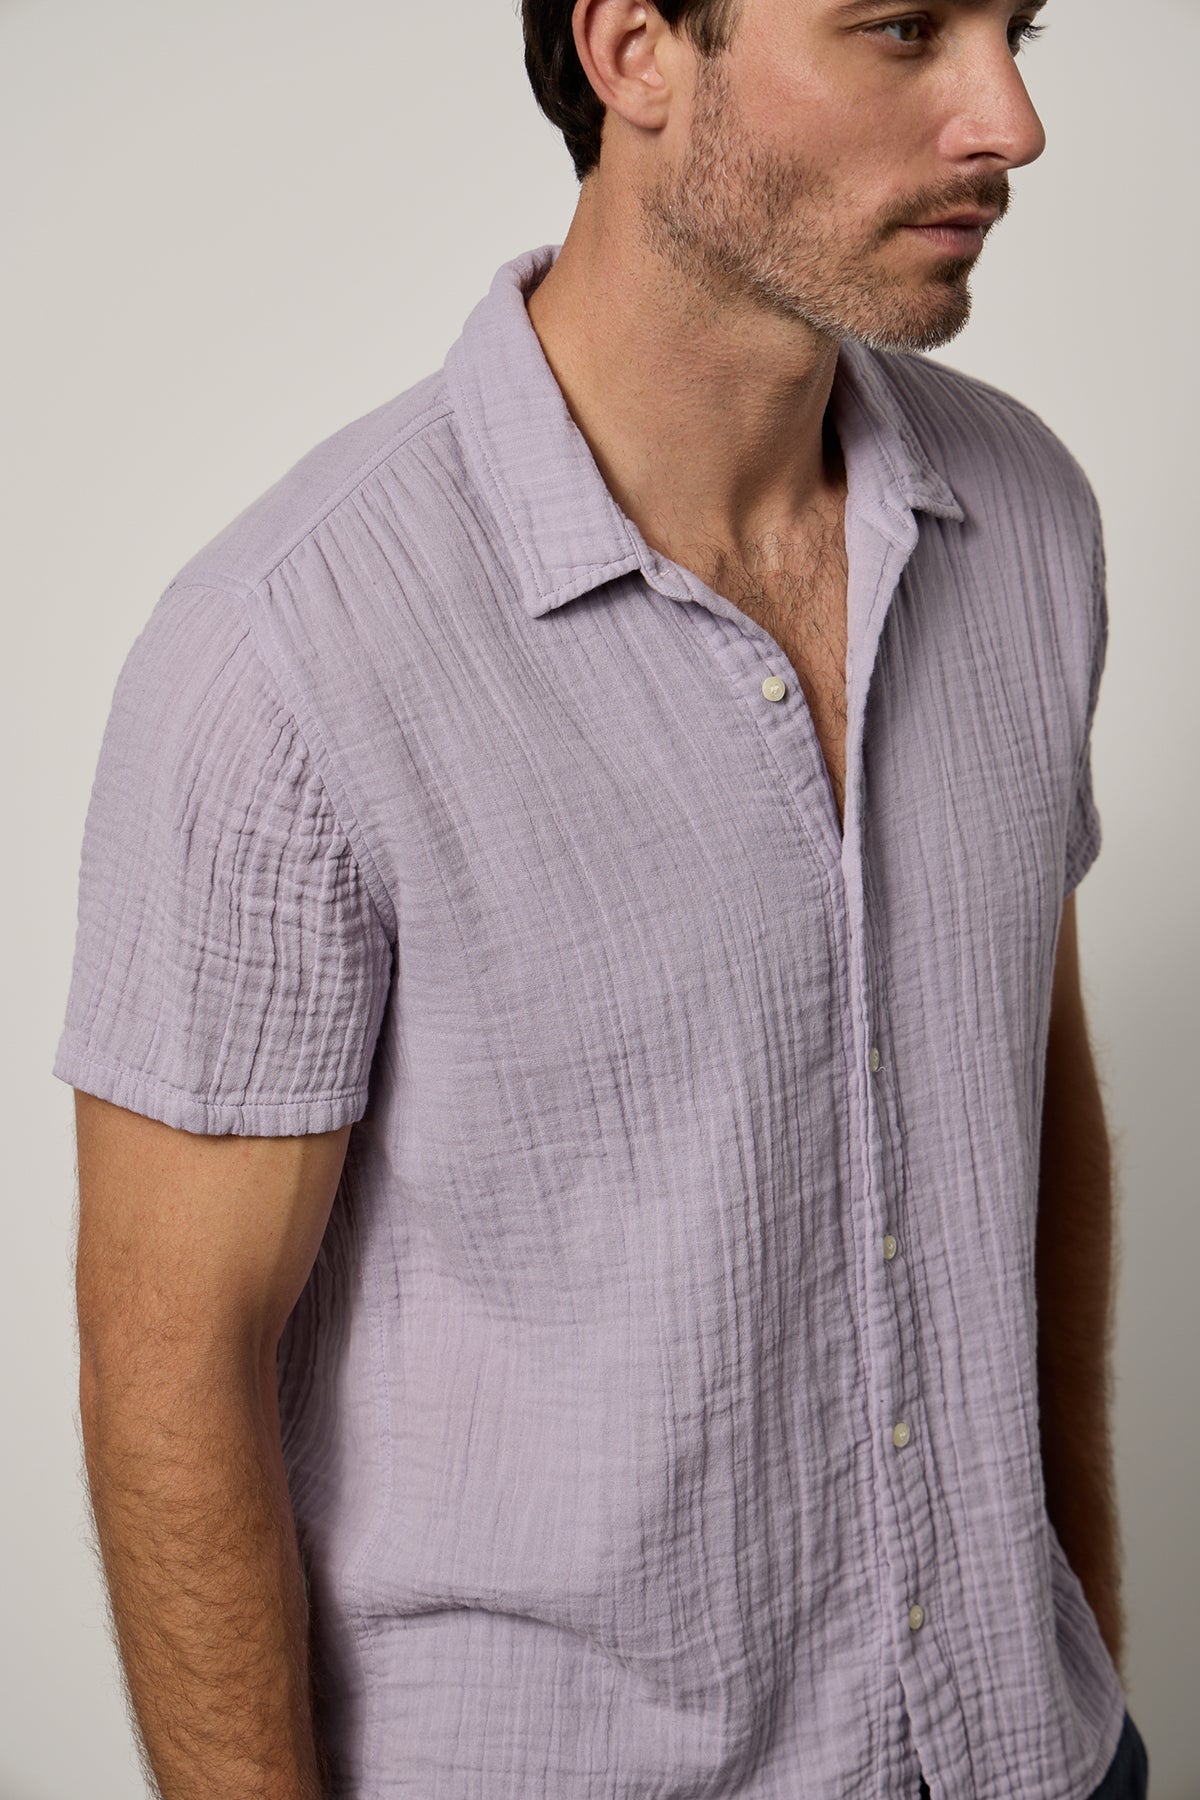 Christian Shirt in lilac close up front-26266329579713